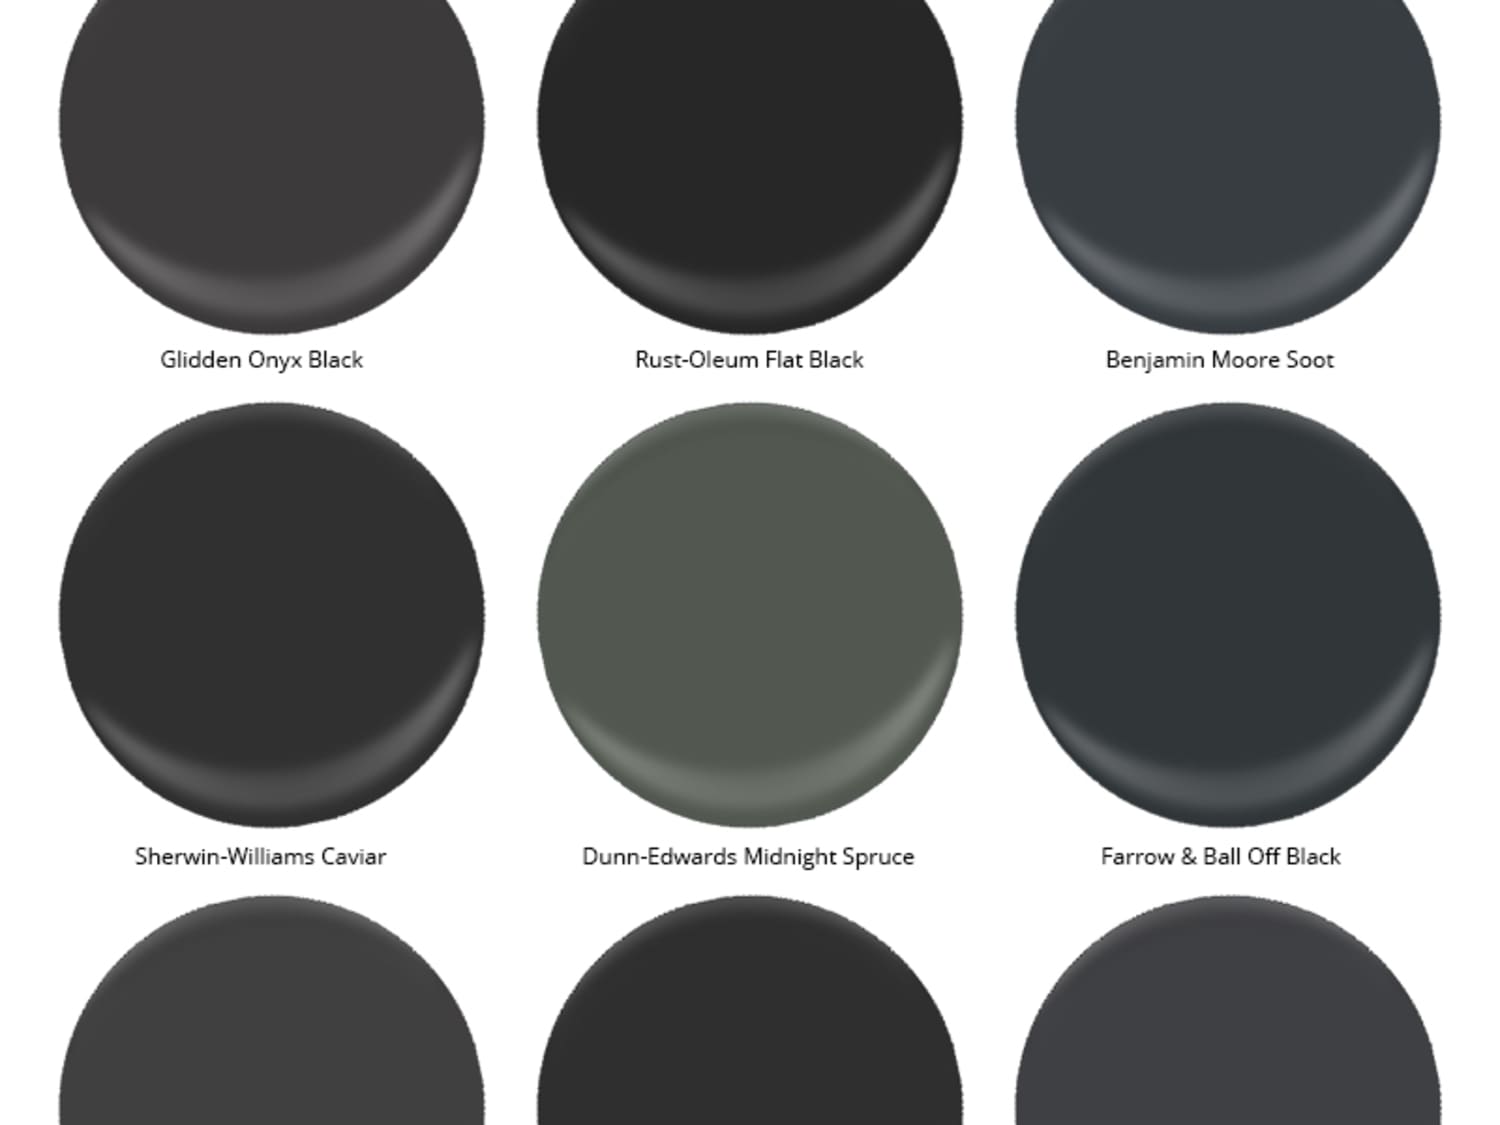 Trade Secrets: The Best Black Paint Colors for Any Room